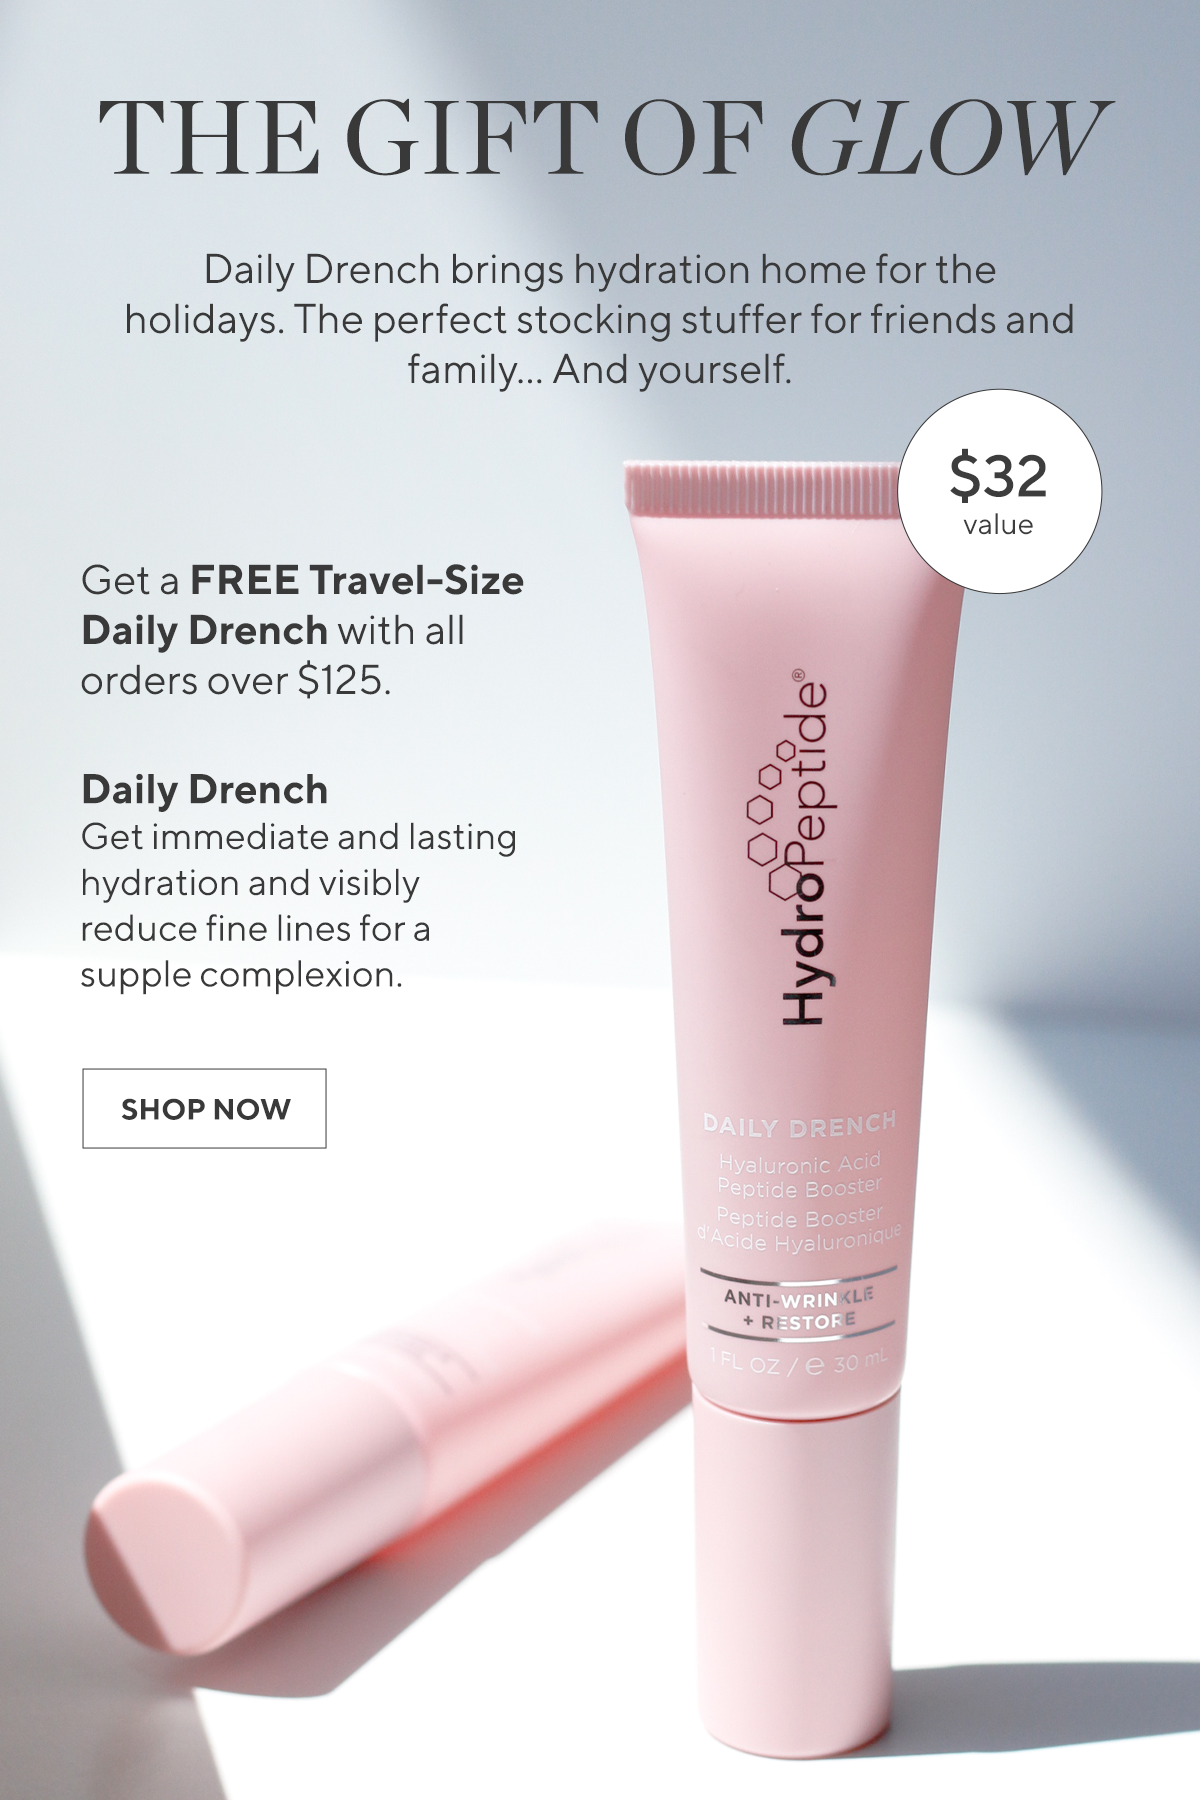 FREE travel Daily Drench with all orders over $125!